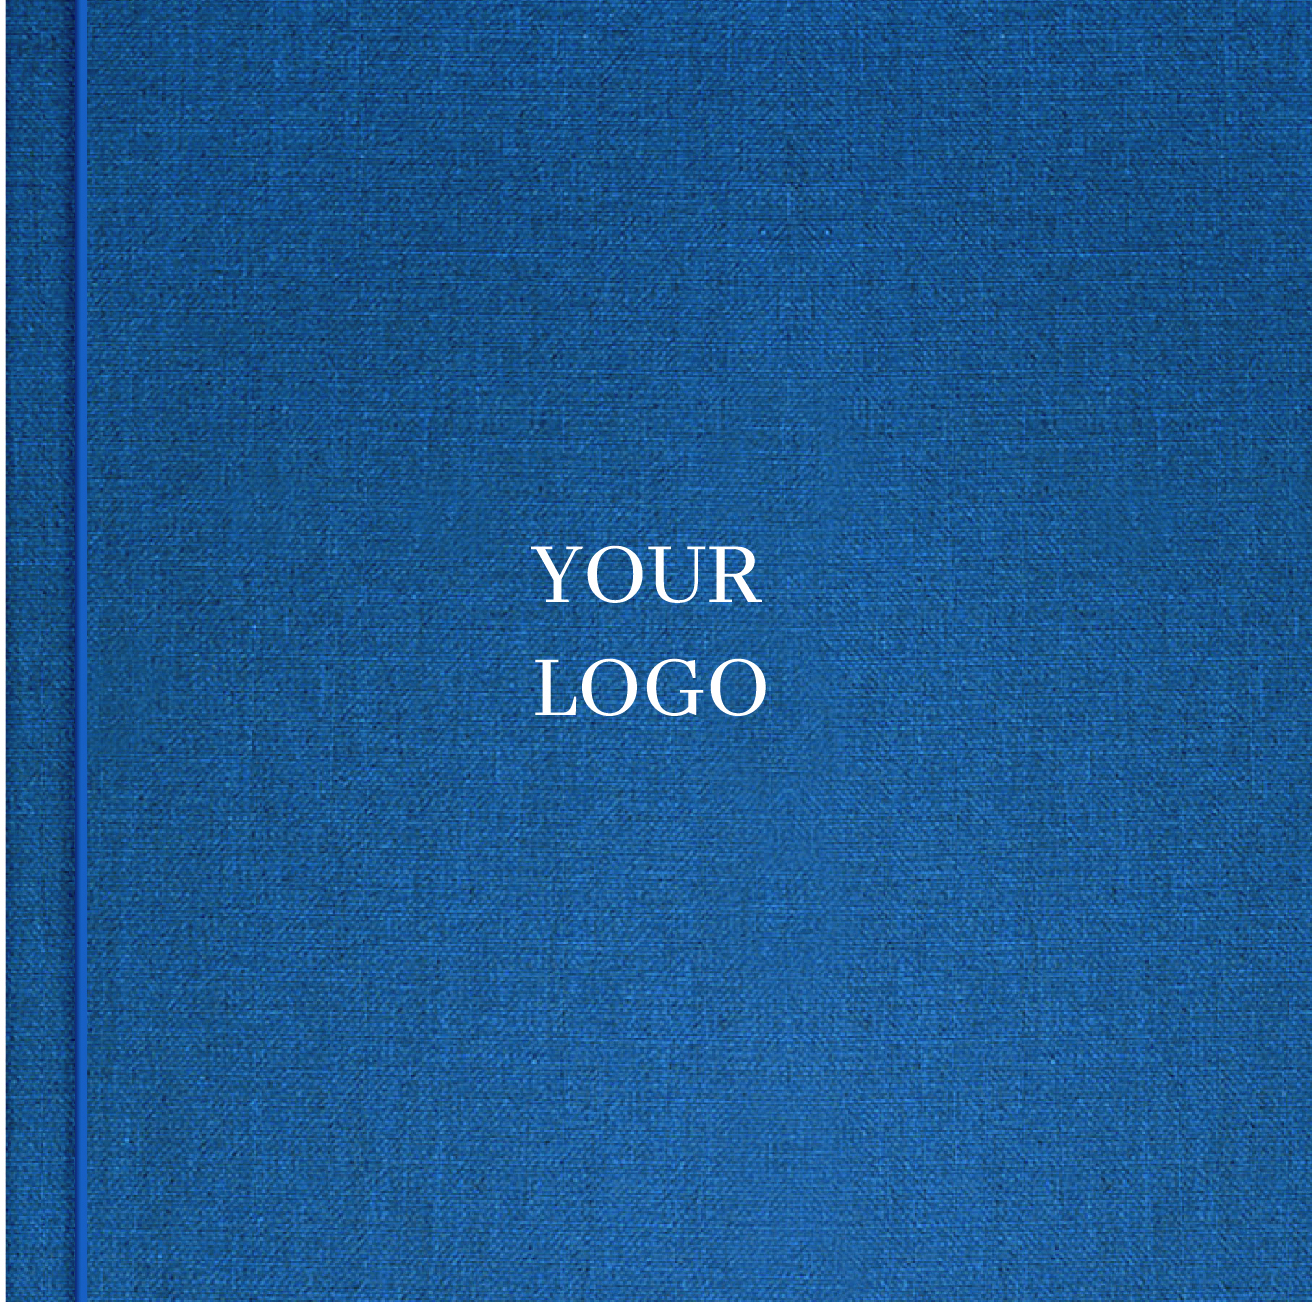 Photo album cover with example of your logo